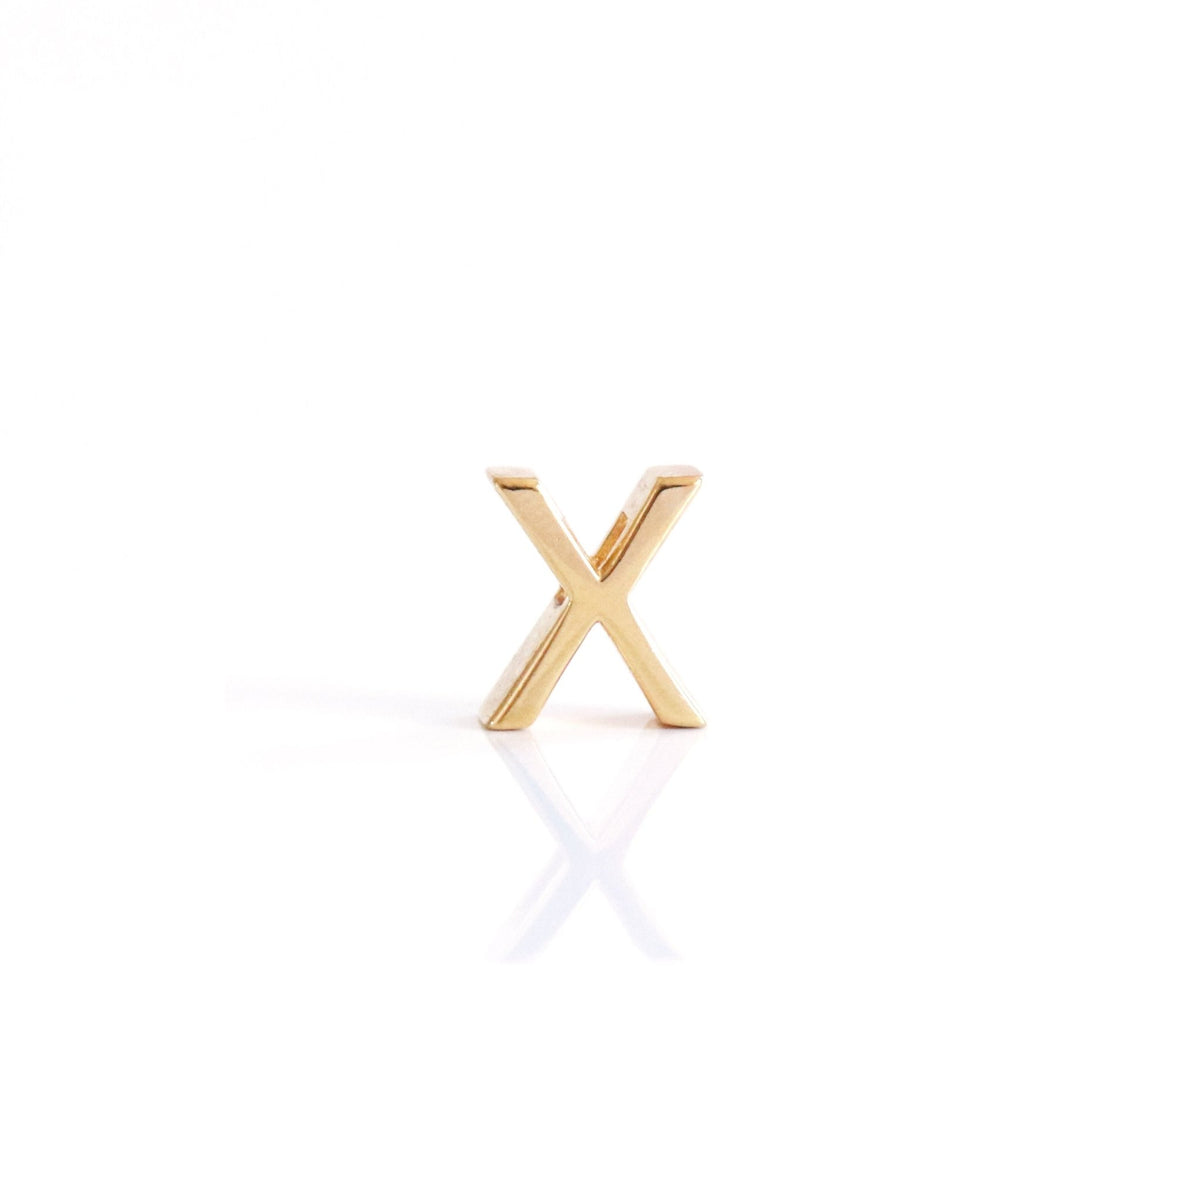 CHARMED INITIAL - X - GOLD OR SILVER - SO PRETTY CARA COTTER